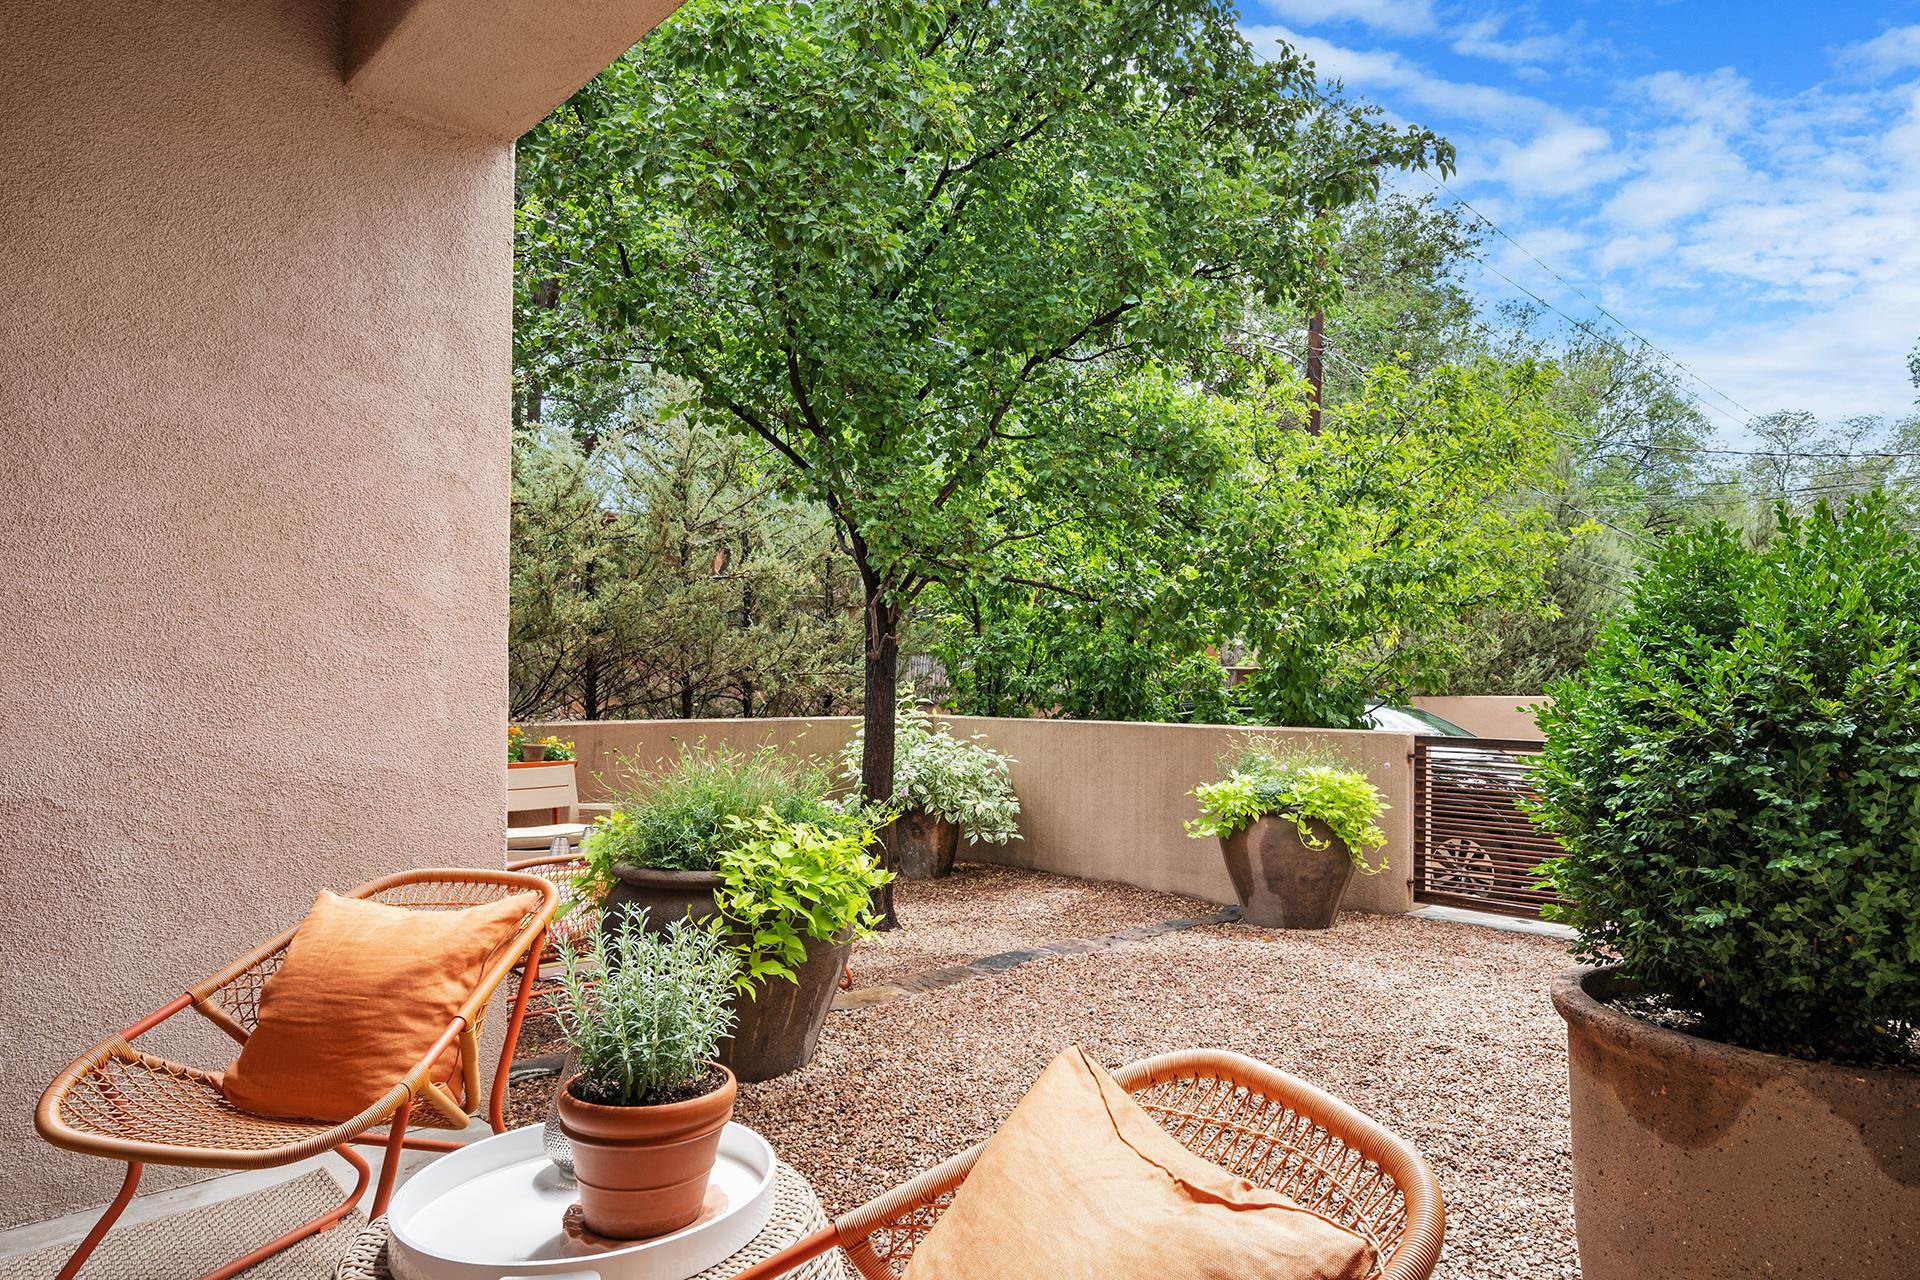 806 Palace Avenue A, Santa Fe, New Mexico 87501, 2 Bedrooms Bedrooms, ,3 BathroomsBathrooms,Residential,For Sale,806 Palace Avenue A,202202334